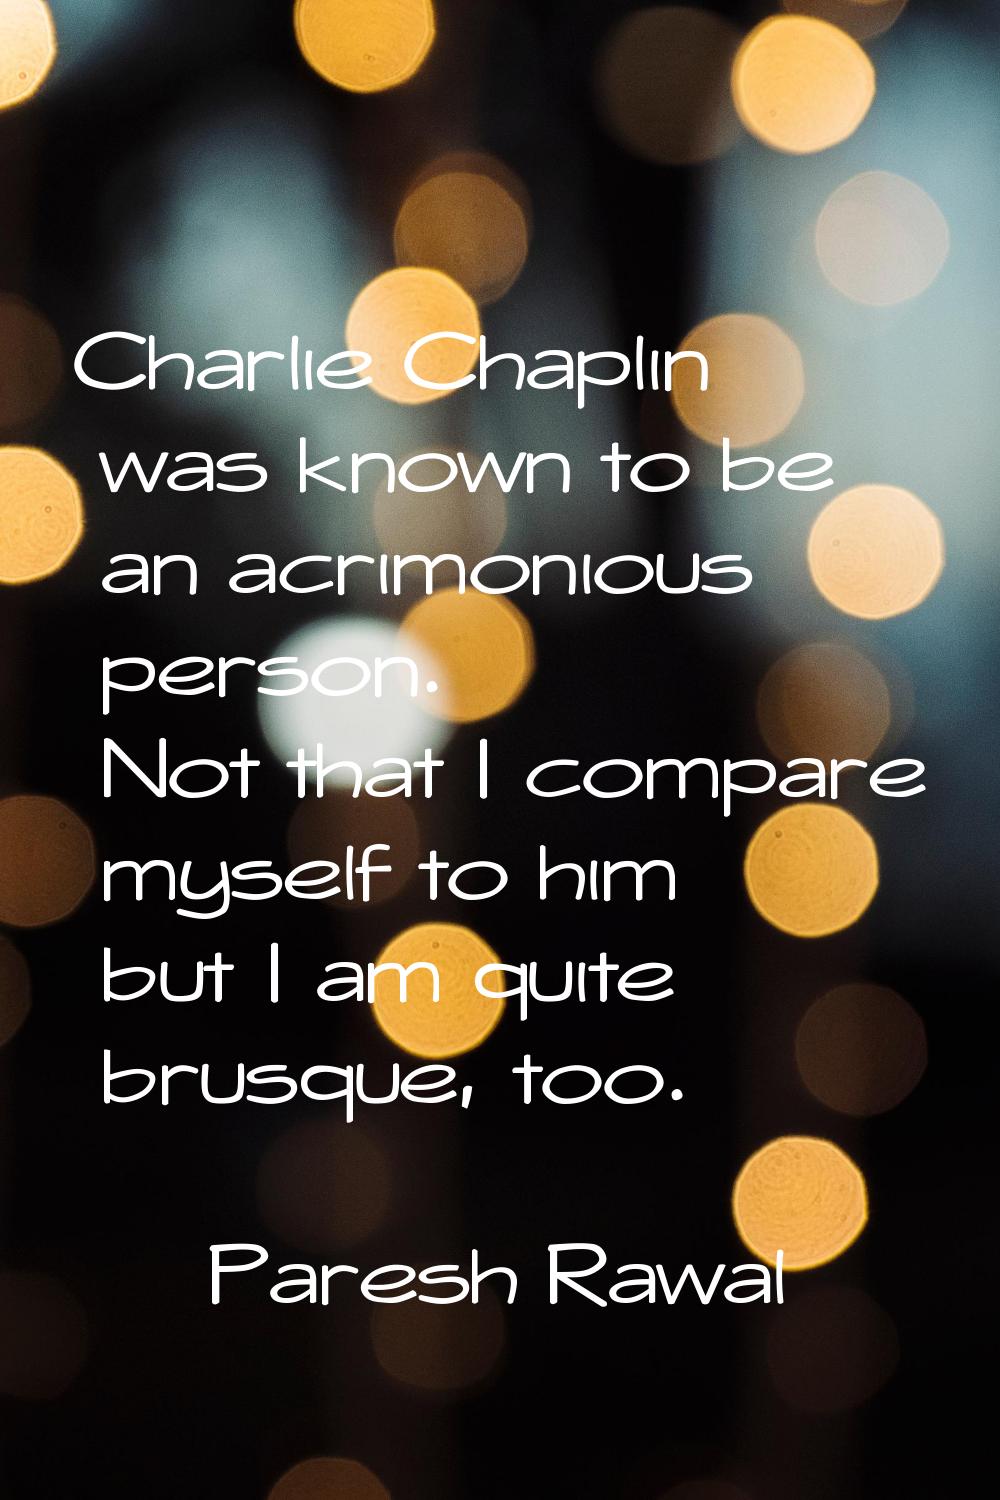 Charlie Chaplin was known to be an acrimonious person. Not that I compare myself to him but I am qu